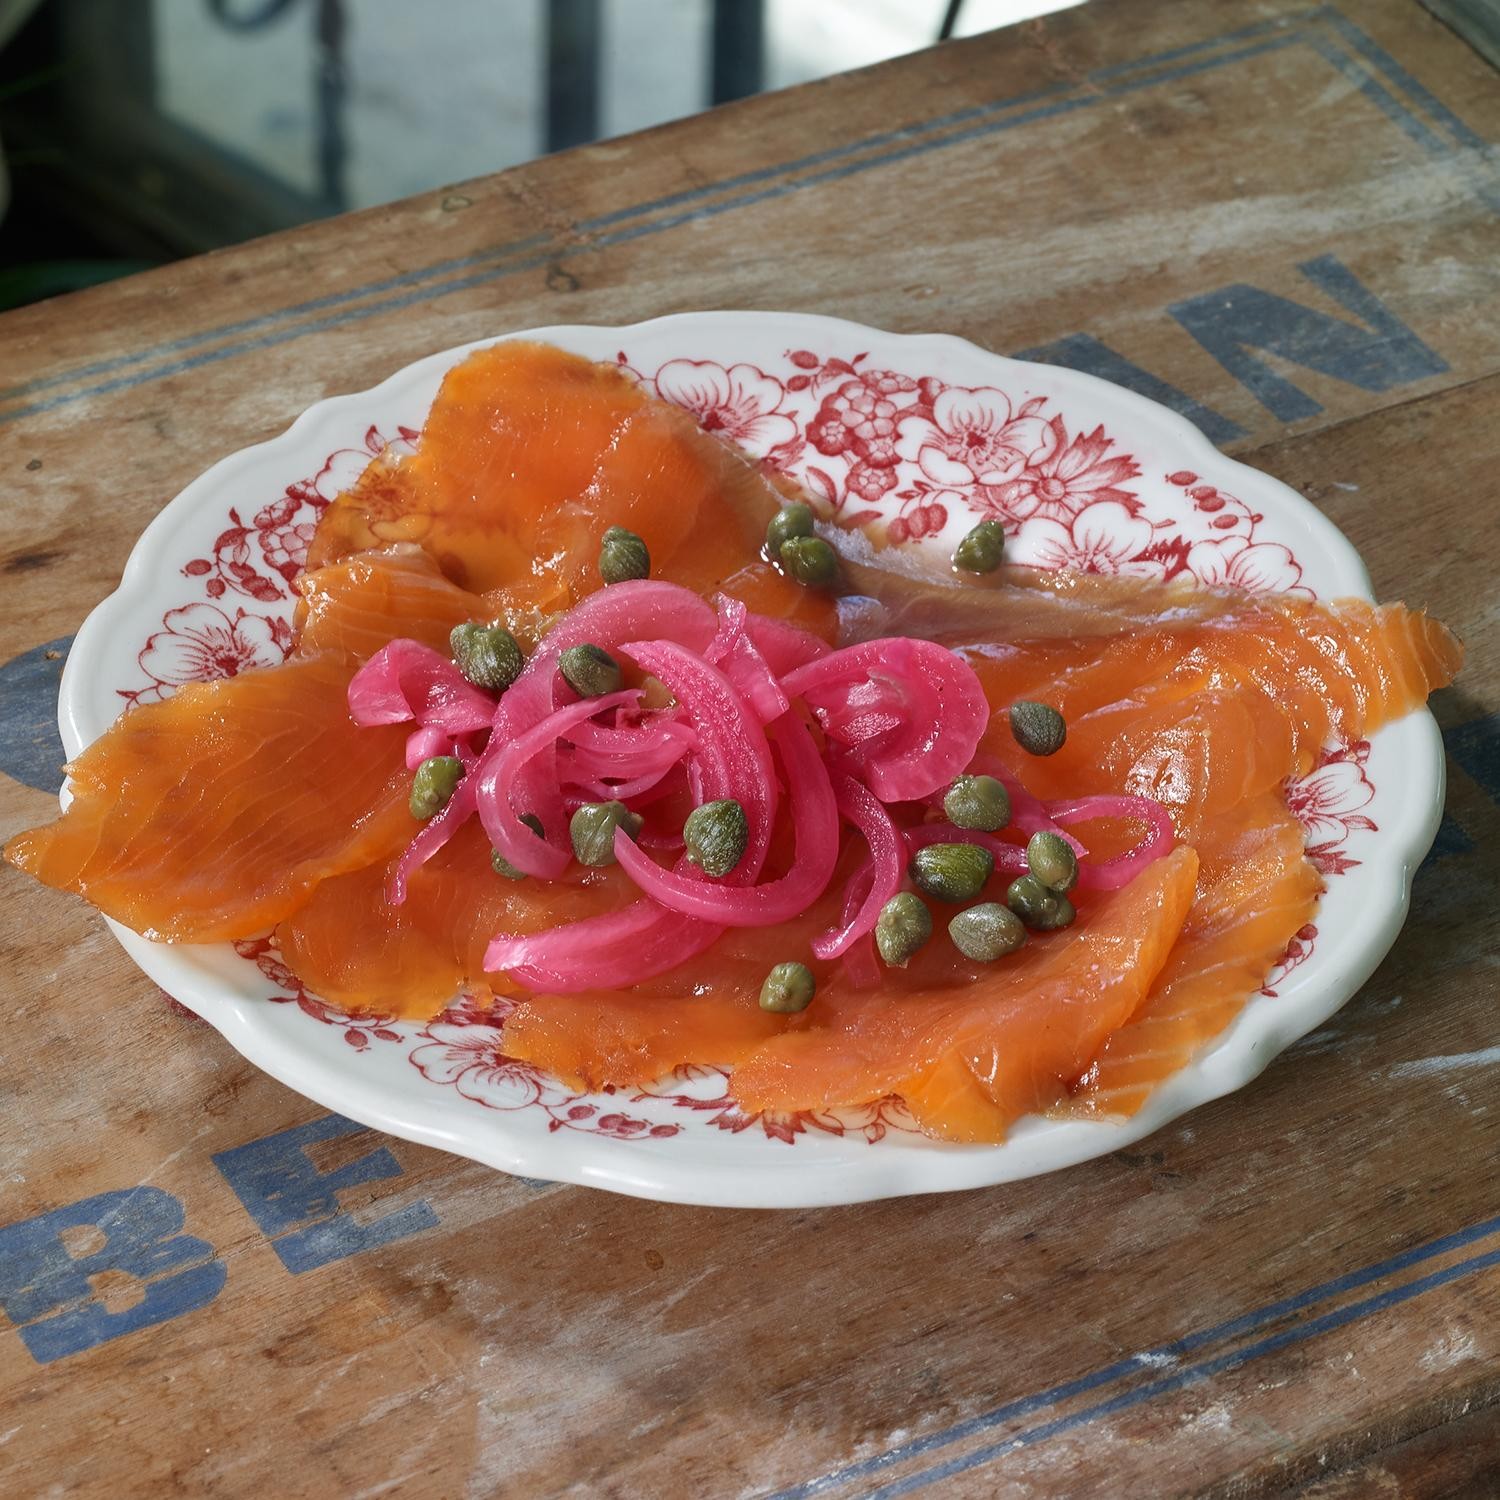 House-Cured Salmon side portion